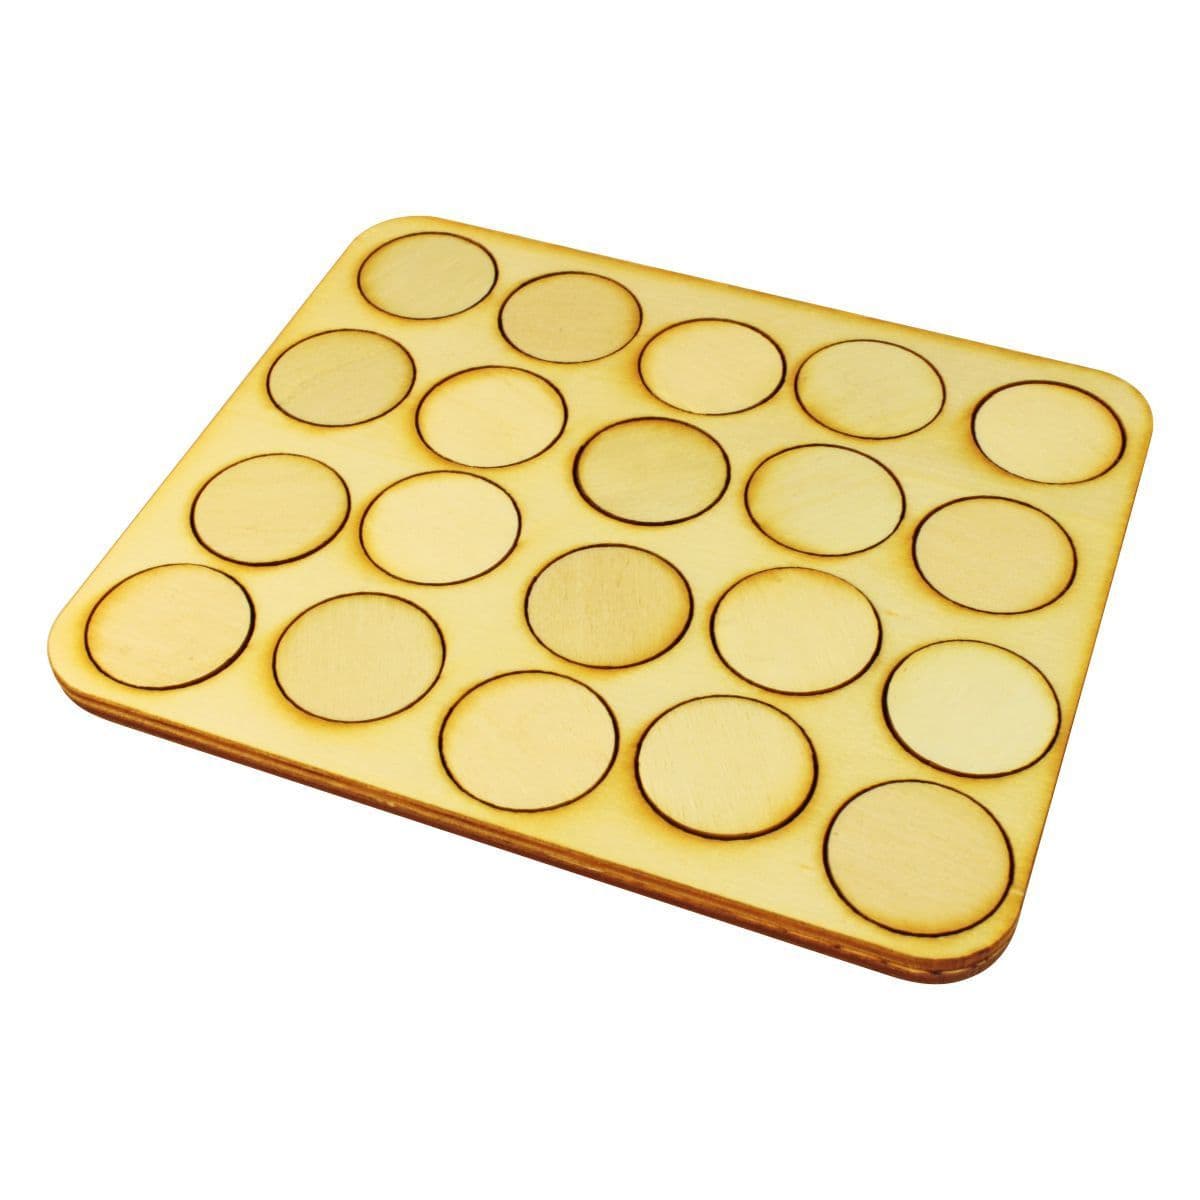 LITKO 5x4 Formation Skirmish Tray for 25mm Circle Bases